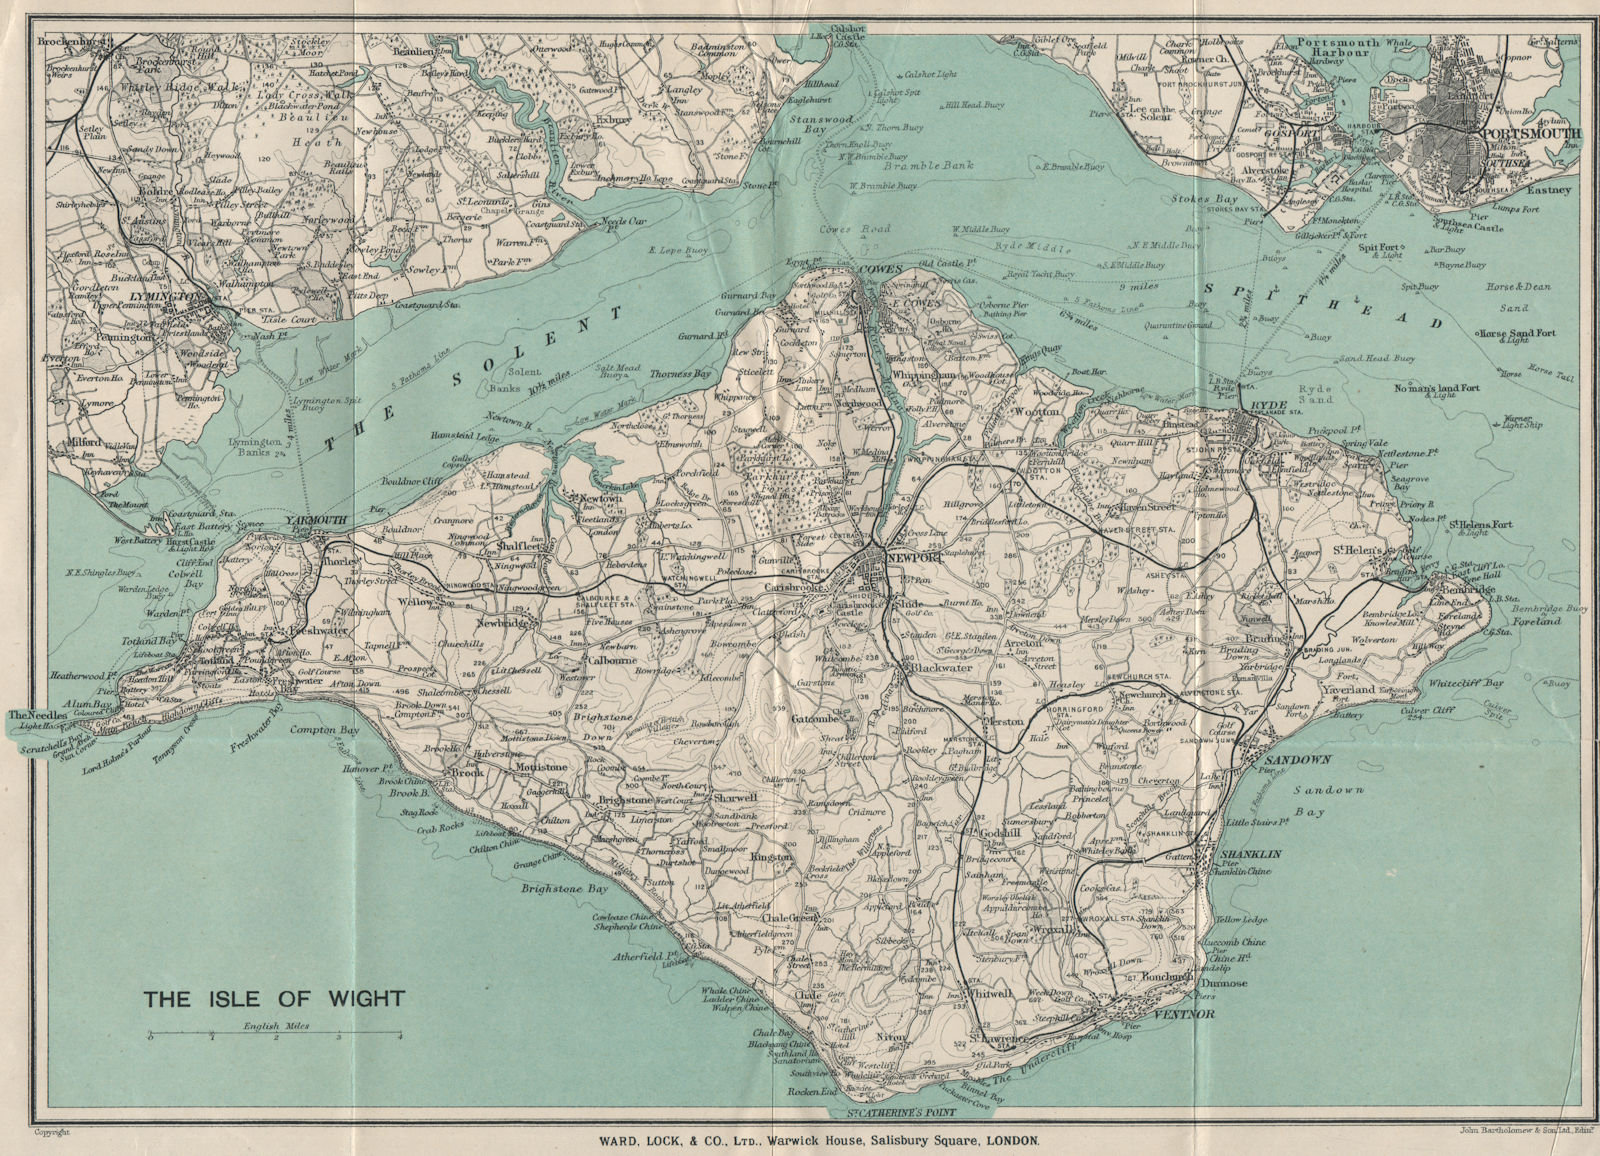 ISLE OF WIGHT showing complete railway network. Cowes Ryde. WARD LOCK 1922 map